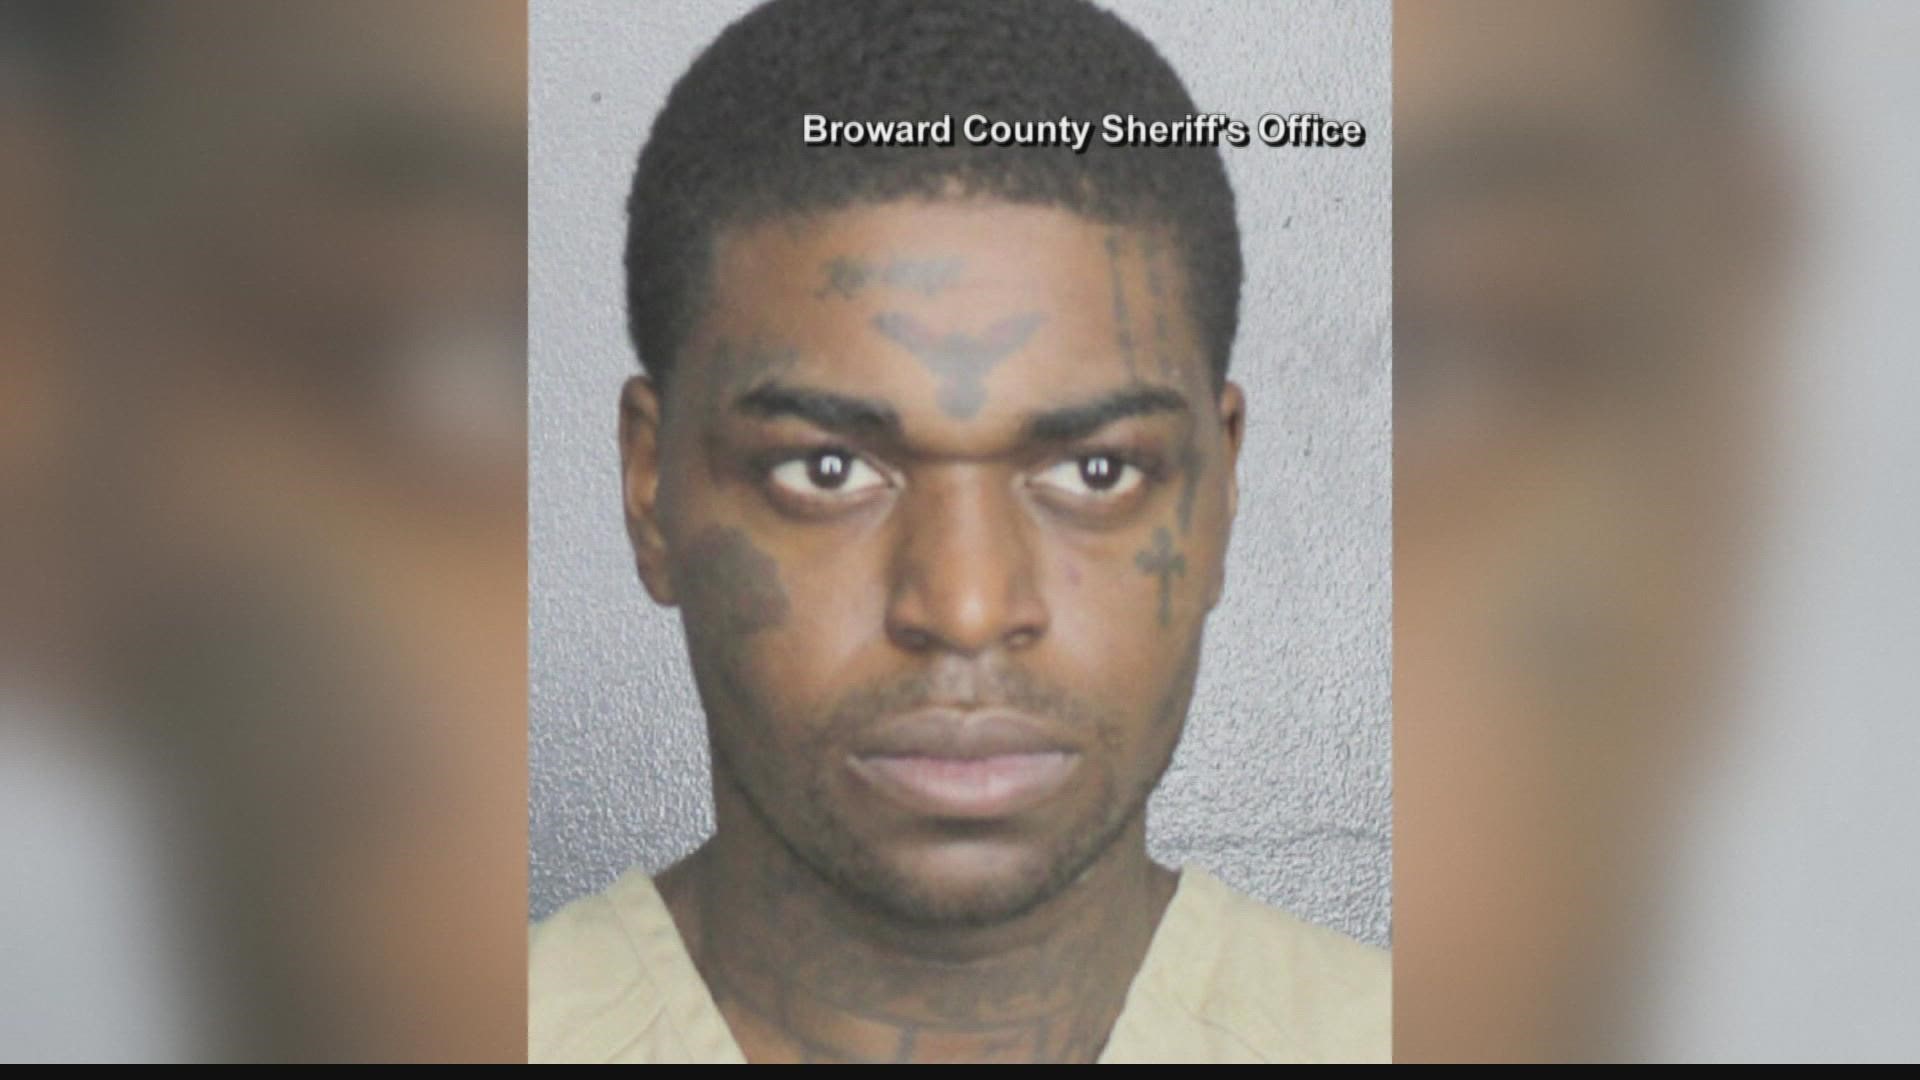 The rapper was arrested by Florida Highway Patrol on Friday in Fort Lauderdale. Troopers say they found thousands of dollars and oxycodone in his car.